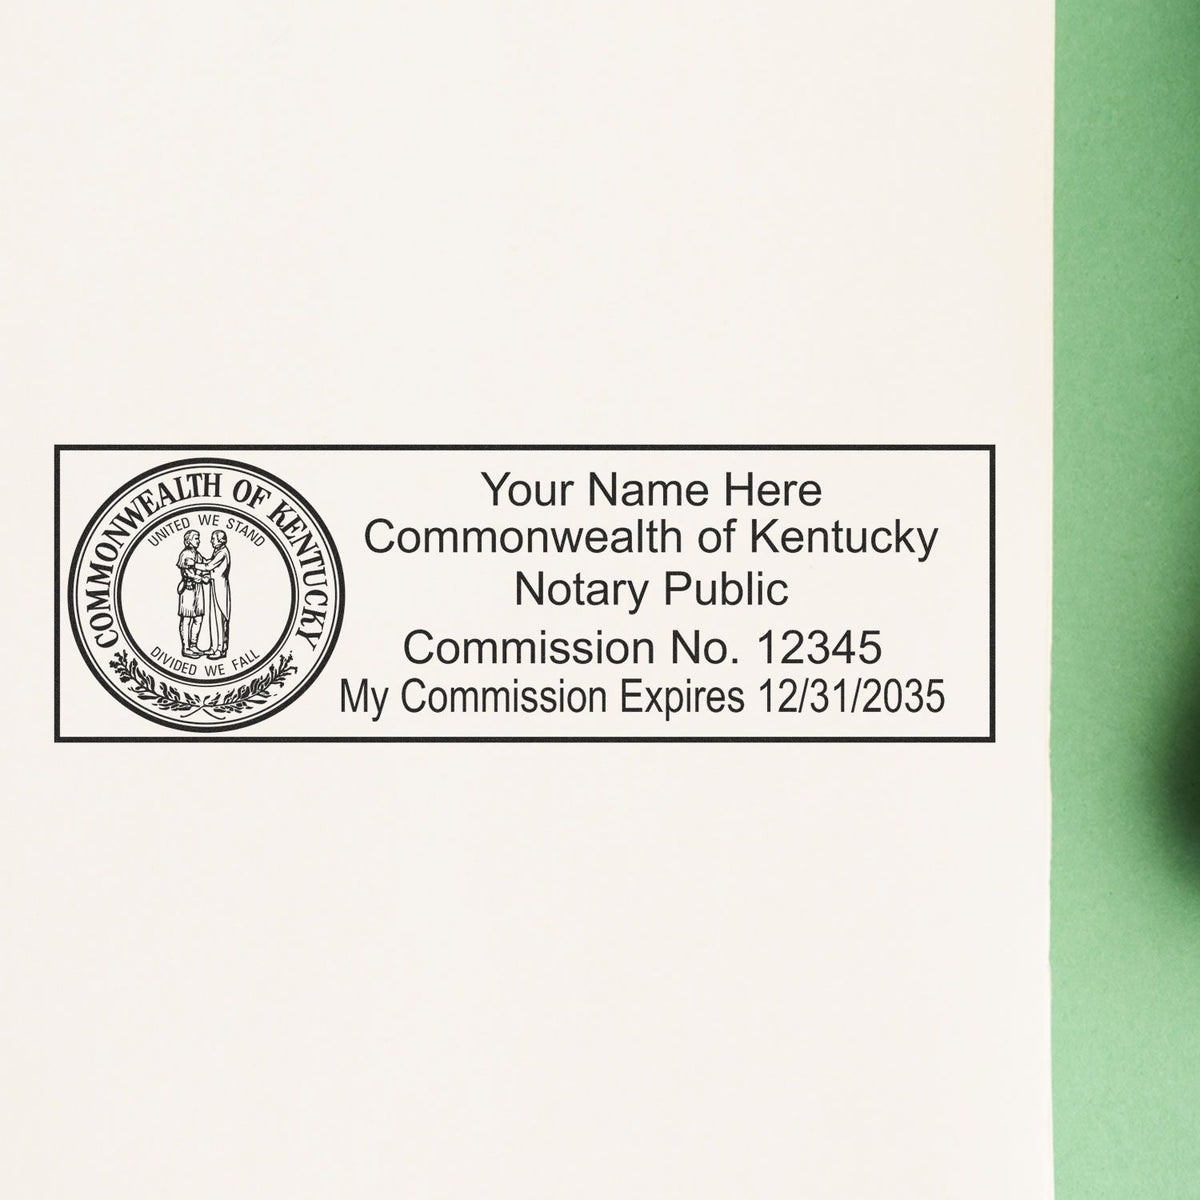 A lifestyle photo showing a stamped image of the Heavy-Duty Kentucky Rectangular Notary Stamp on a piece of paper